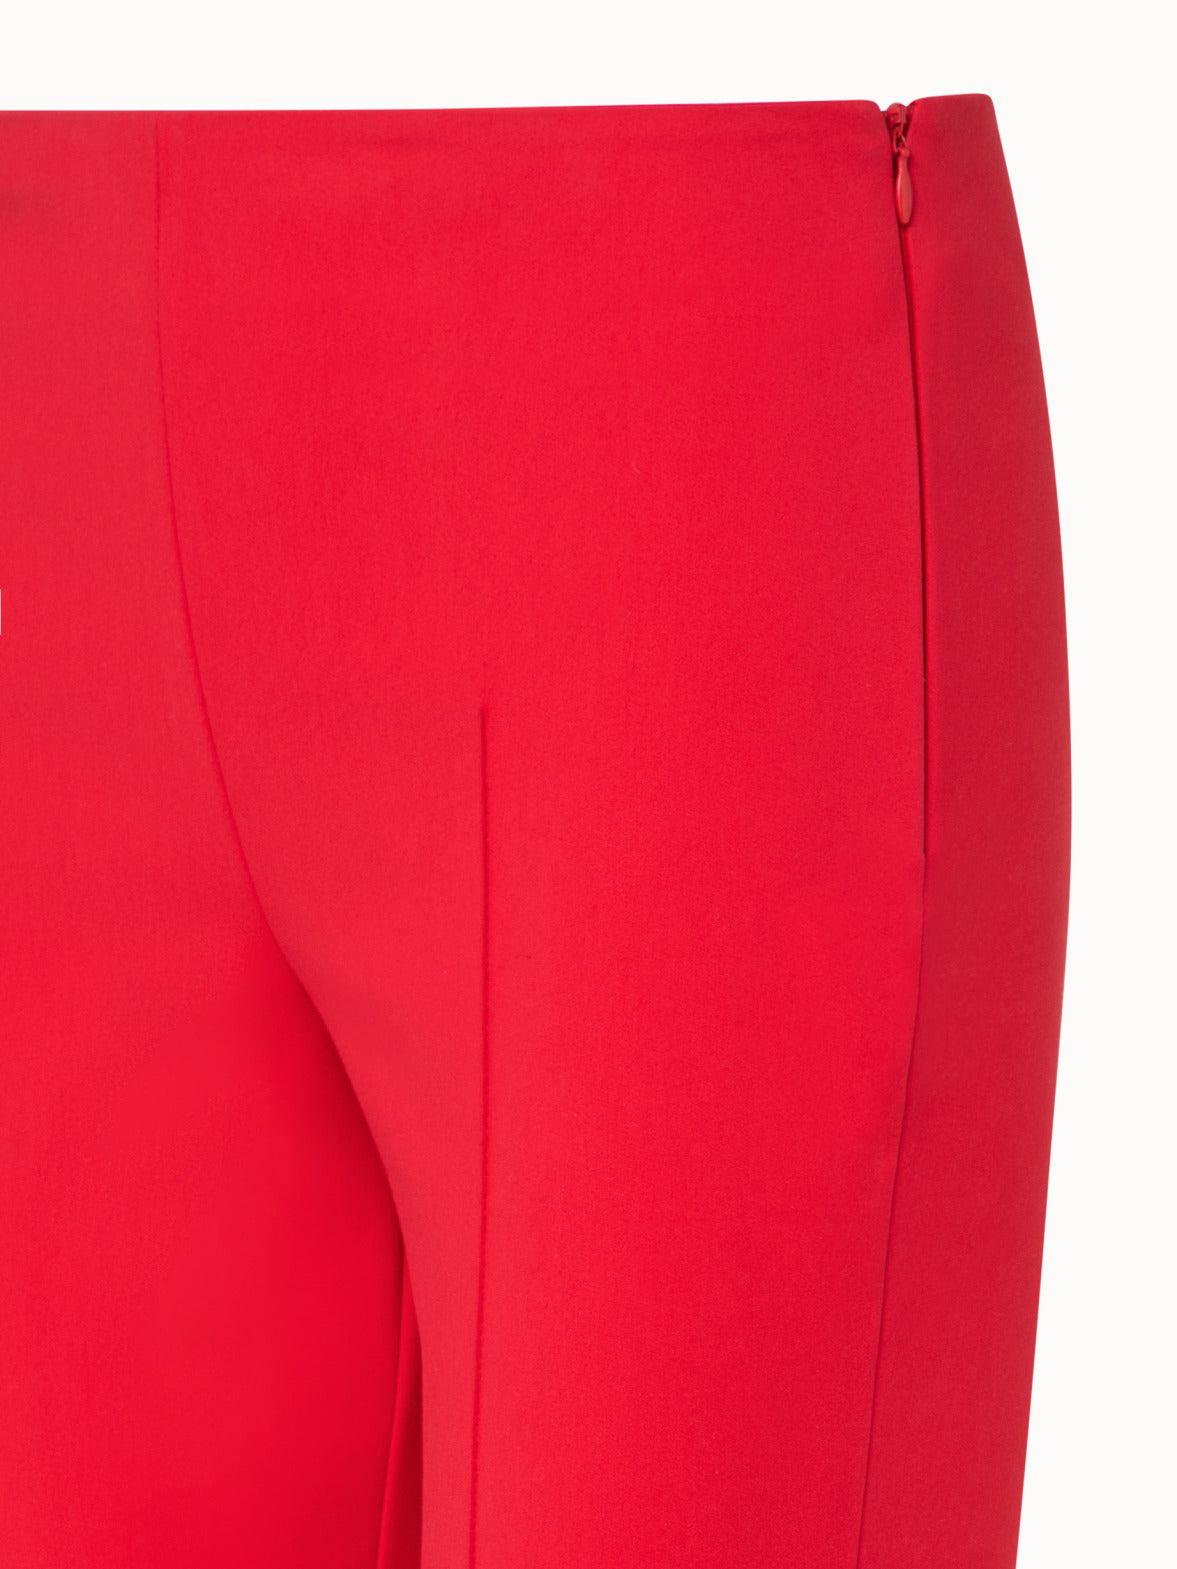 Akris Cotton Techno Slim Pants in Red | Lyst